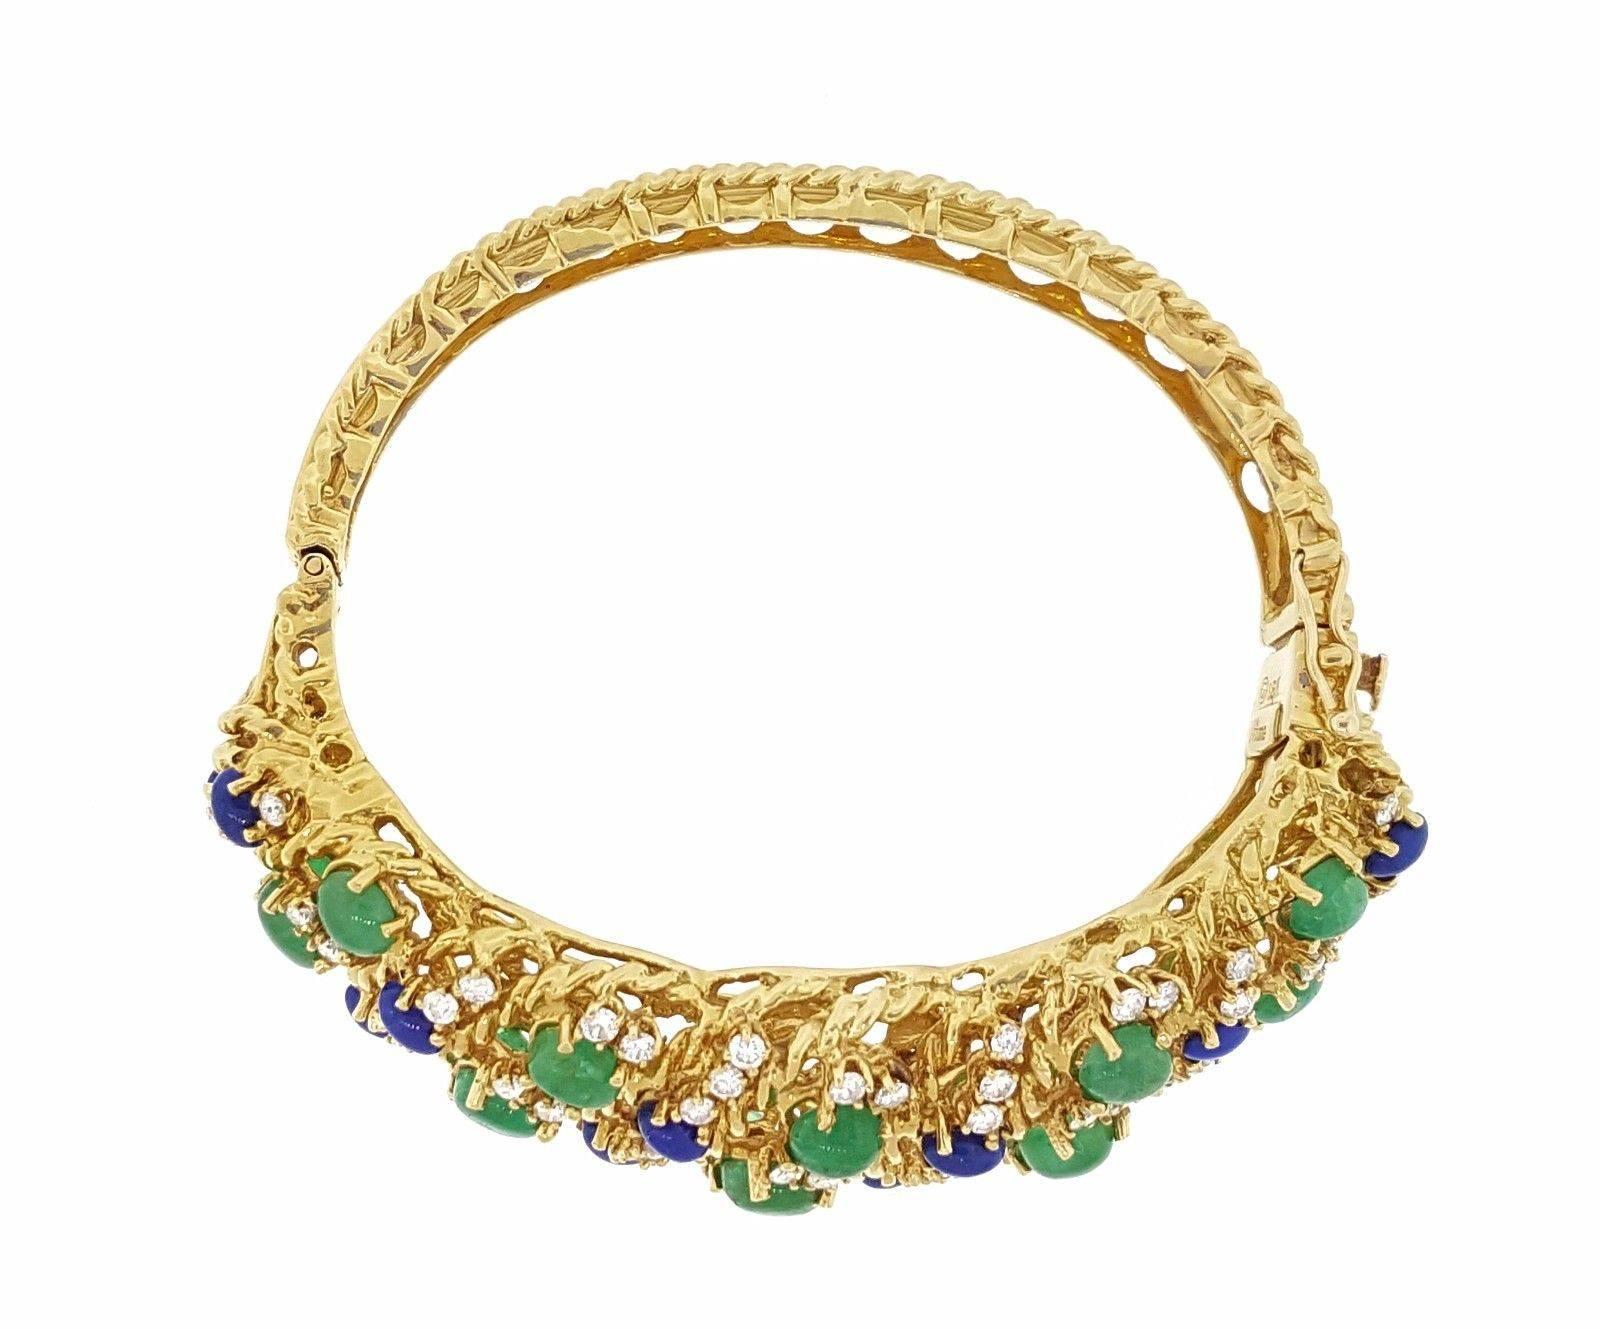 Vintage wide multicolor bangle bracelet with diamonds, emerald and lapis in 18k Yellow Gold. This 58.9 gram bracelet is composed of 67 round brilliant full cut diamonds totaling an estimated 2.00 ct, with bright and lively stones. 
The clarity is